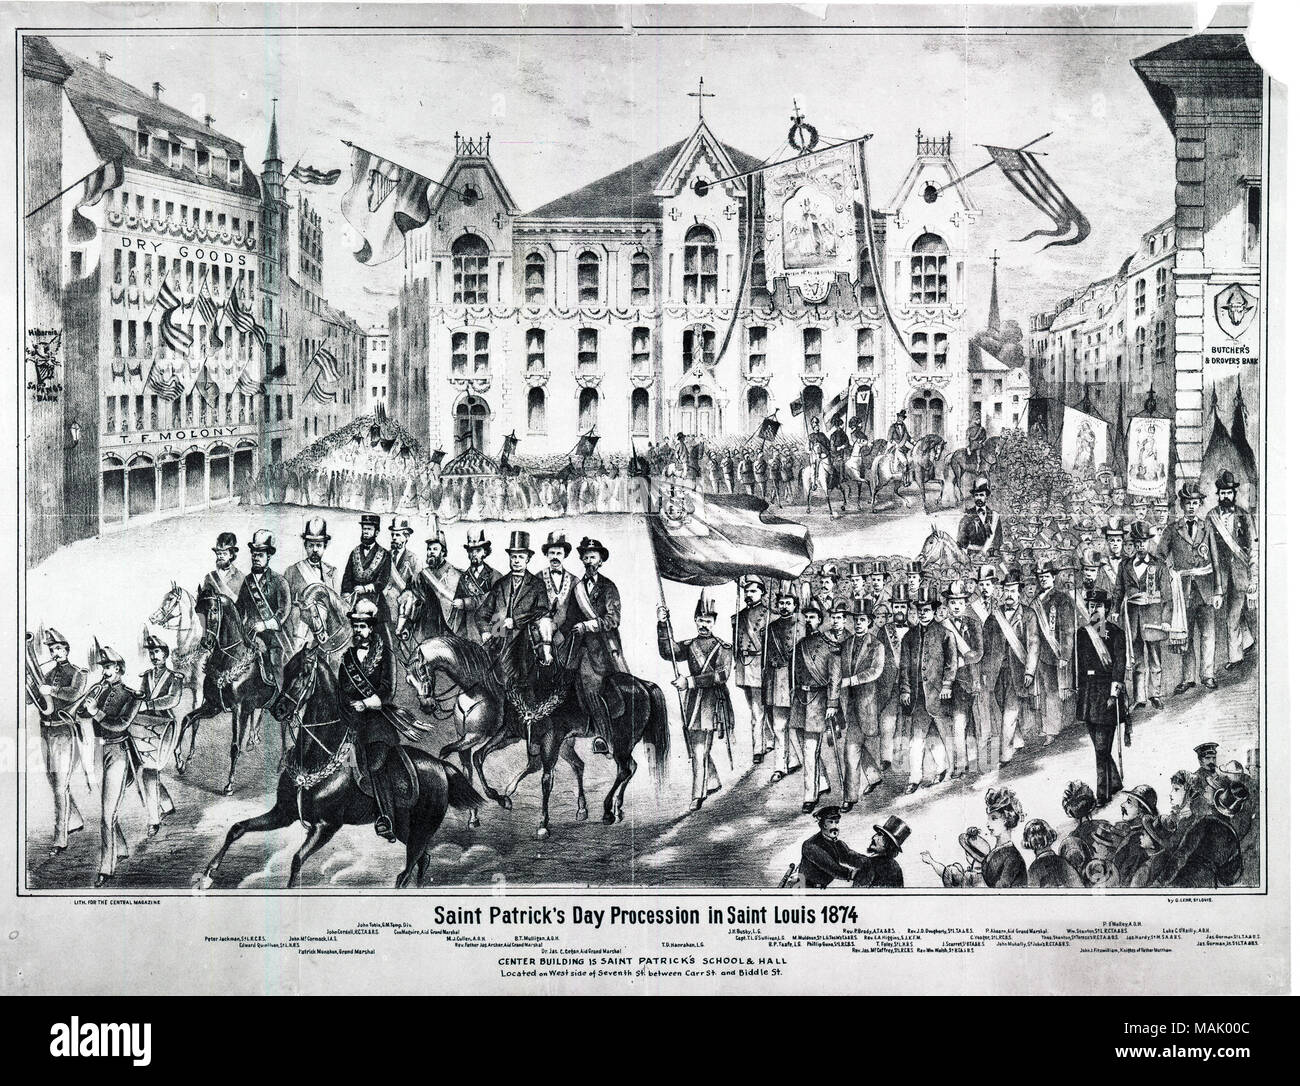 Horizontal lithograph showing a view of the 1874 Saint Patrick's Day procession in front of Saint Patrick's School and Hall, also includes T.F. Molony Dry Goods Building, Butcher's and Drover's Bank, and Hibernia Savins Bank. Prominent persons are identified in the caption. Title: 'St. Patrick's Day Procession in St. Louis, 1874', west side of Seventh Street between Carr Street and Biddle Street.  . March 1874. G. Lehr Stock Photo